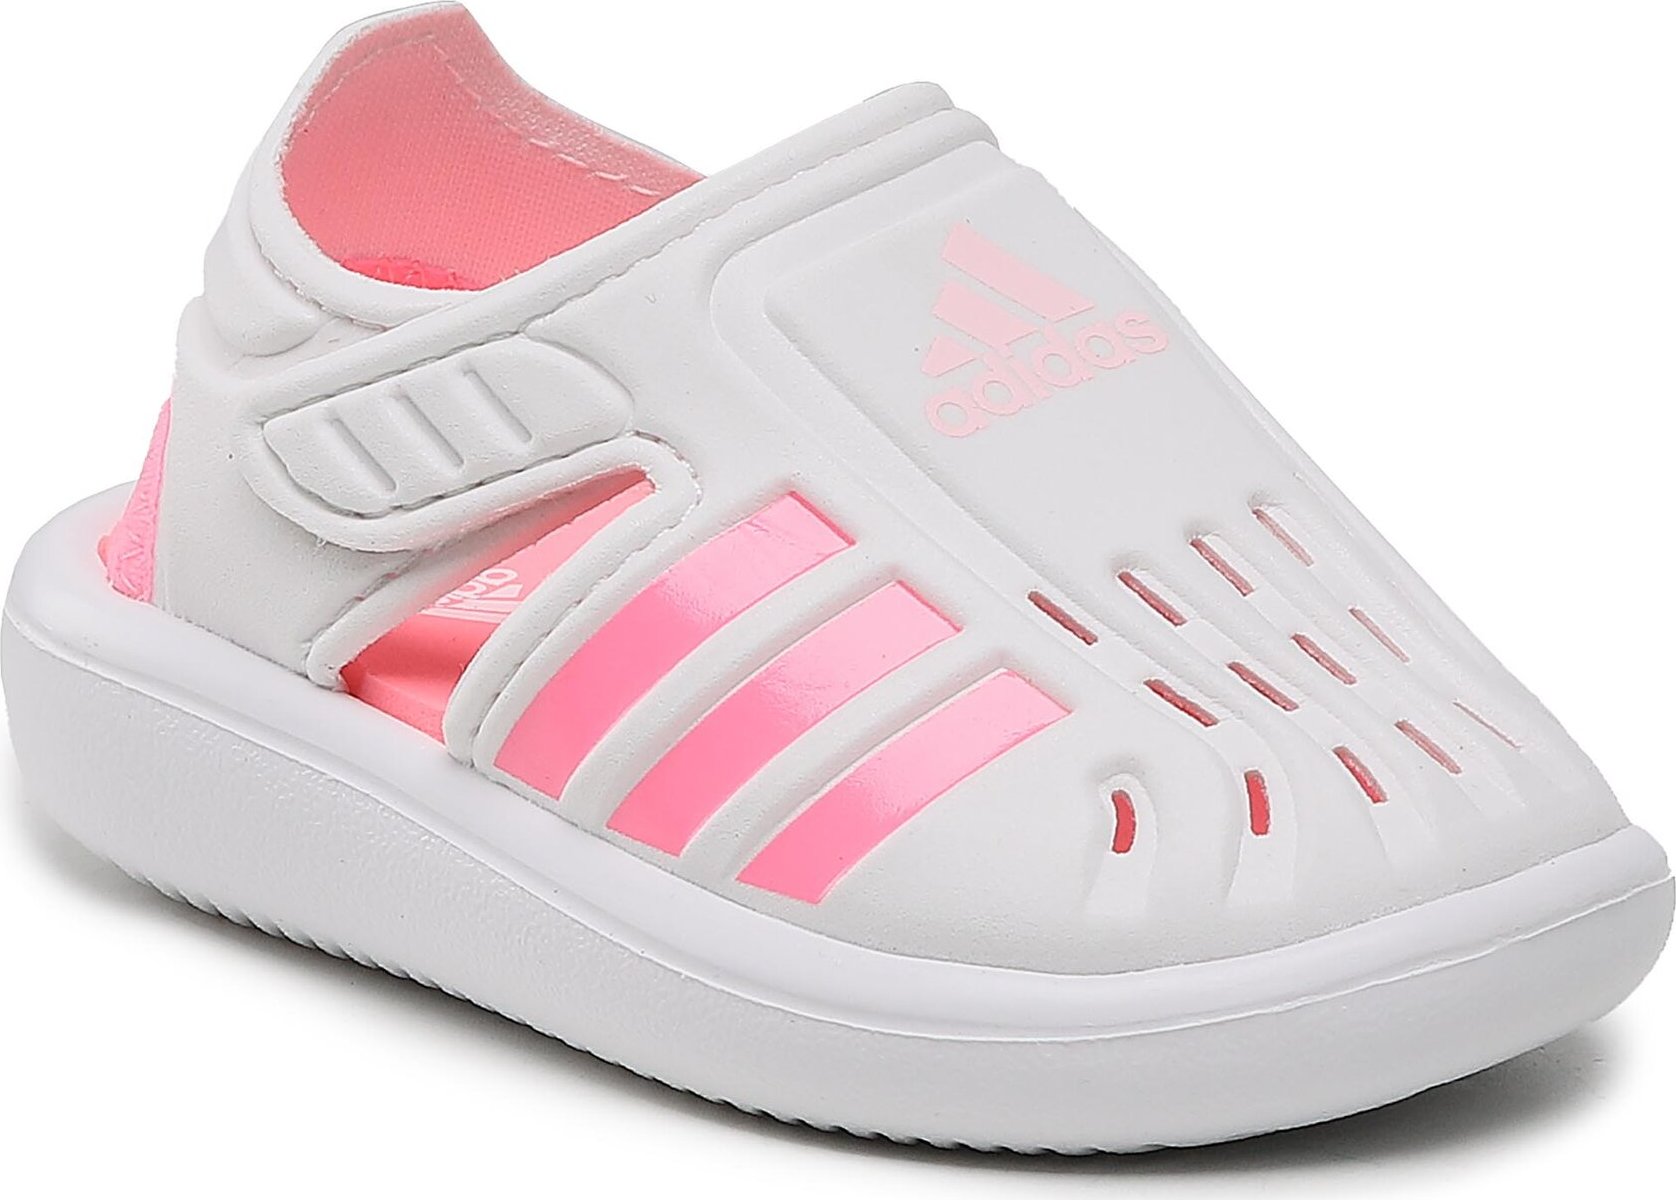 Boty adidas Water Sandal I H06321 Cloud White/Beam Pink/Clear Pink